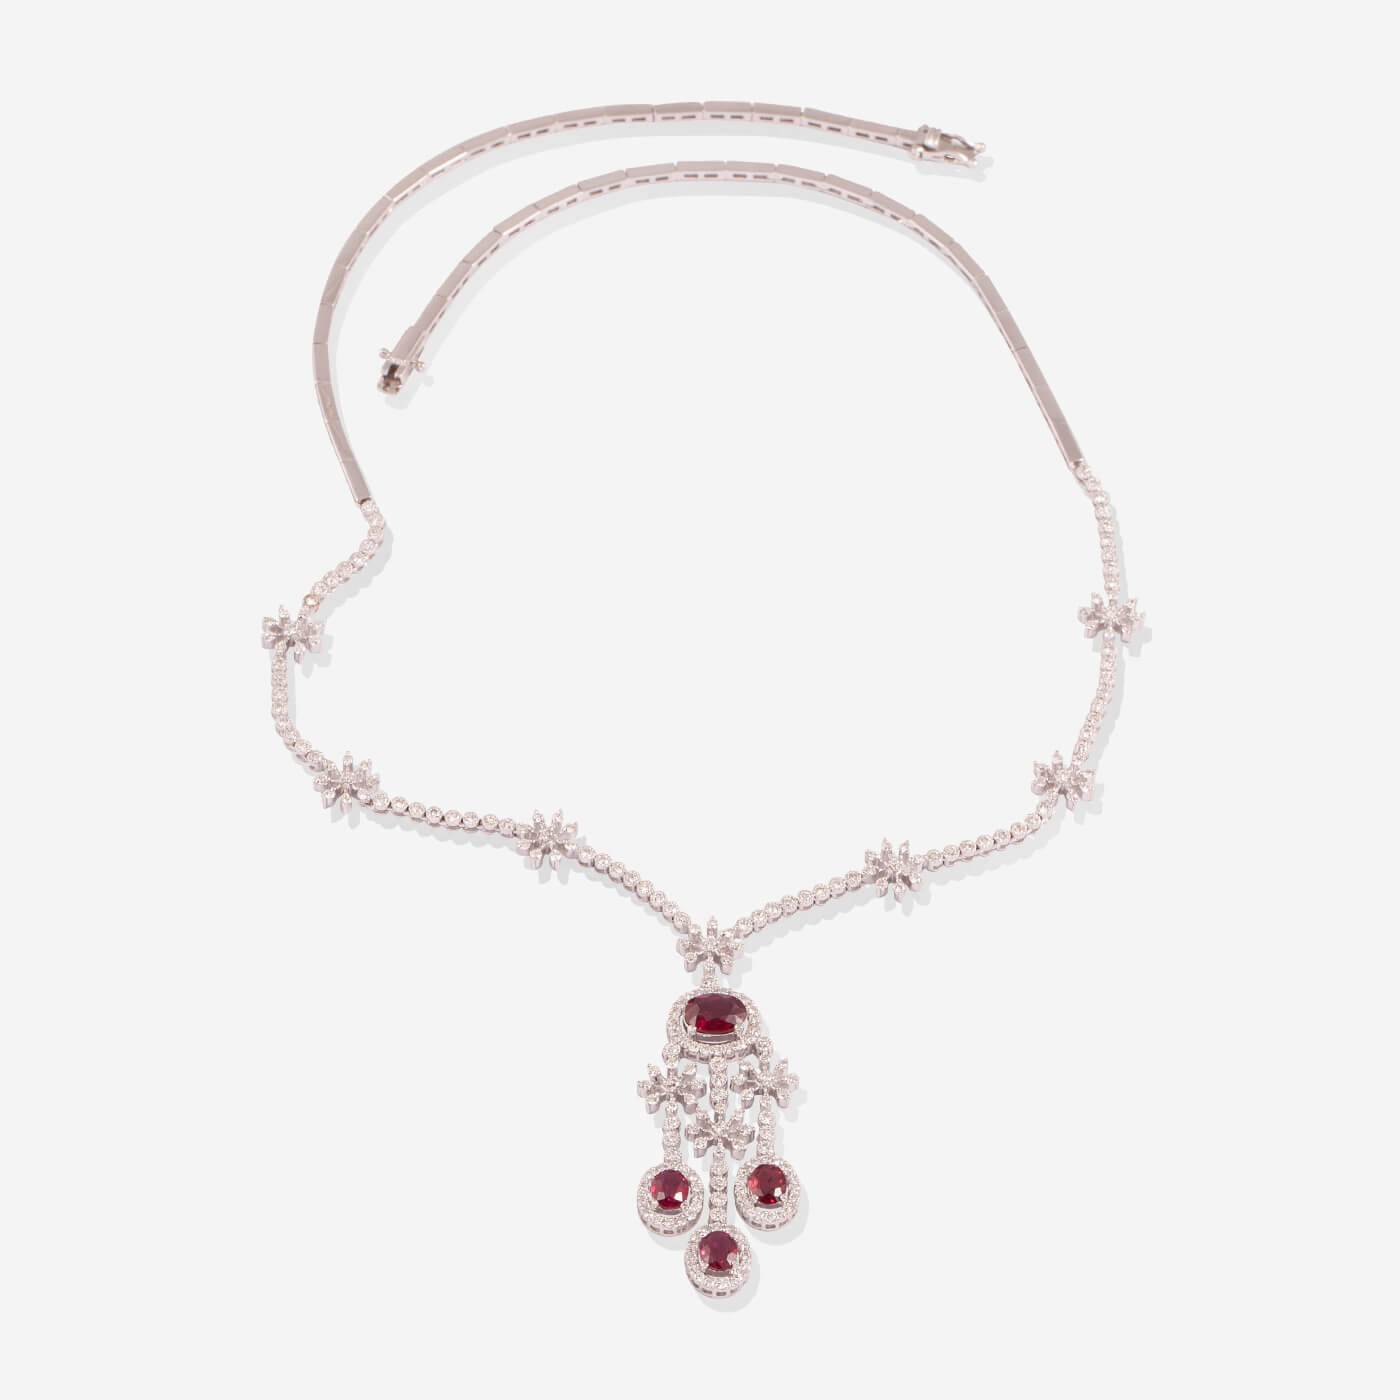 White Gold Dangling Rubies With Diamonds Necklace - Ref: RG01903